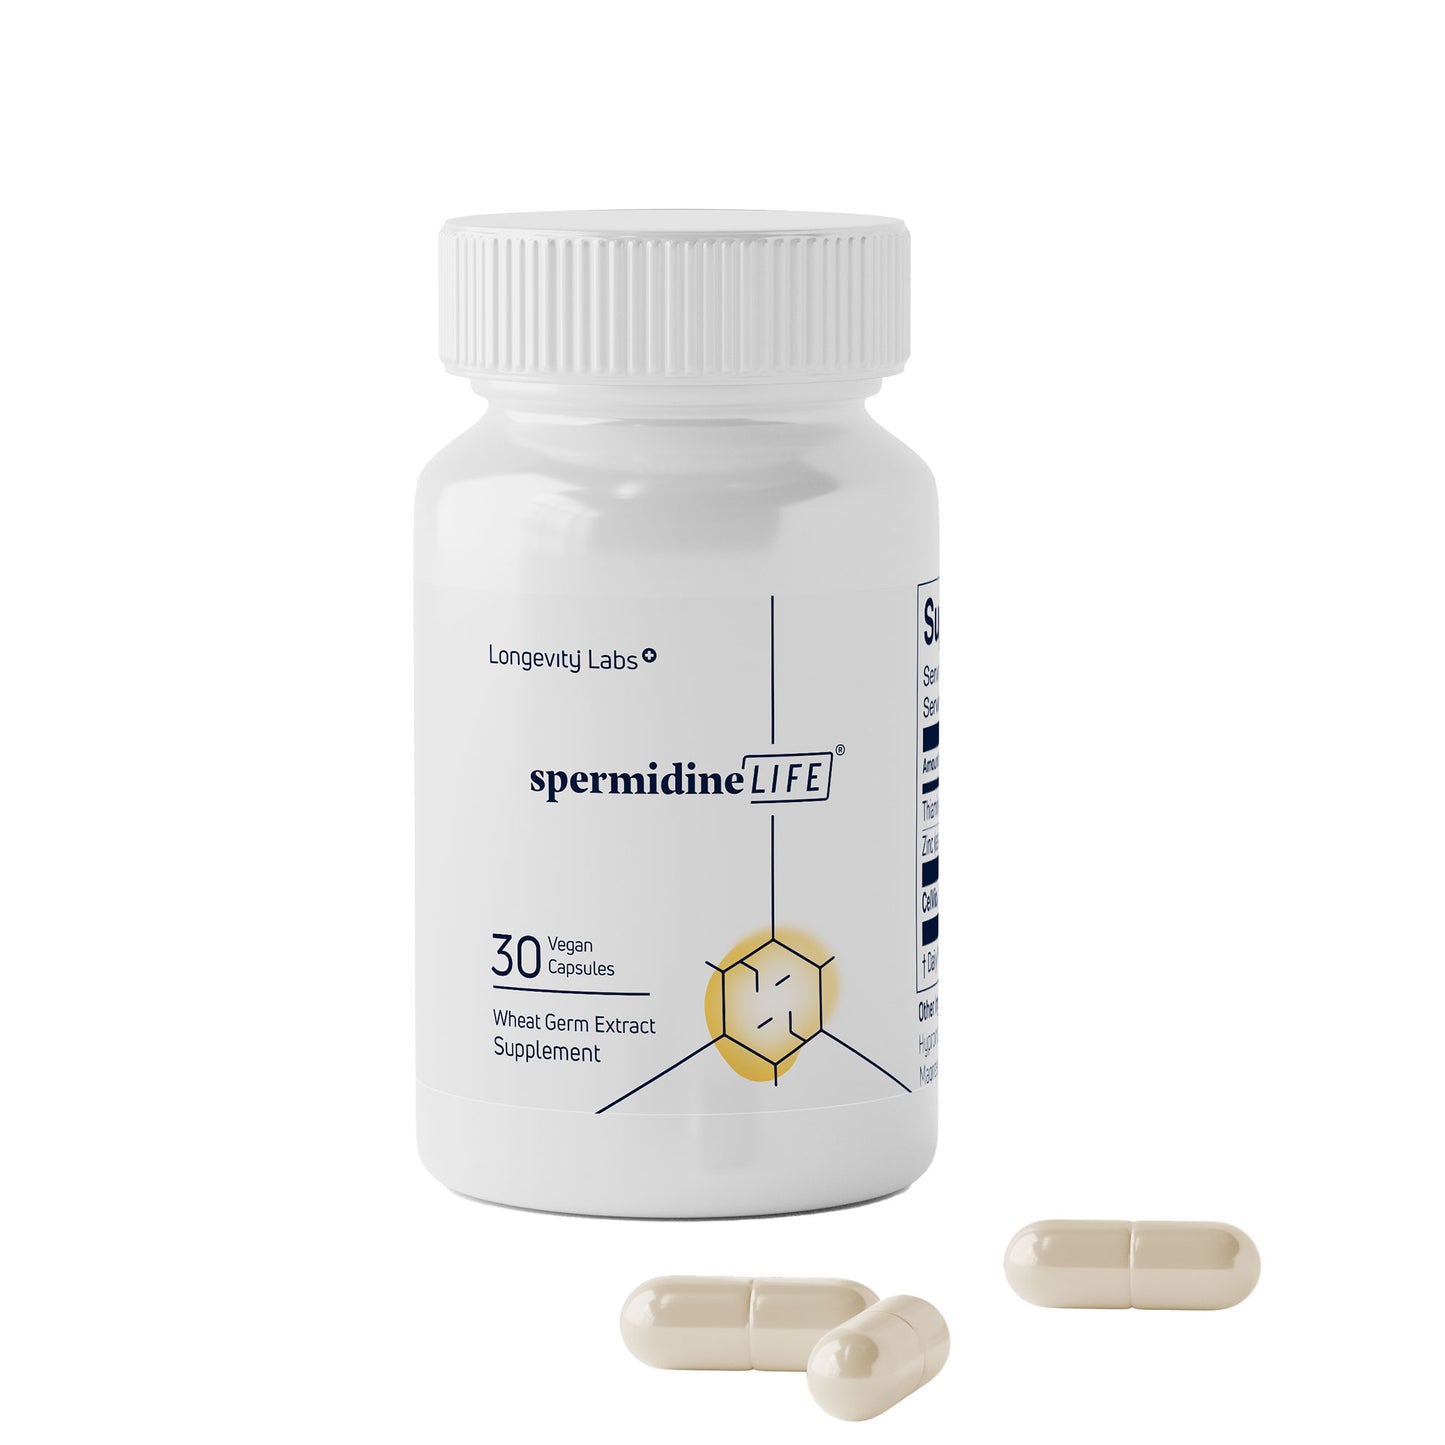 A bottle of sporamin with wheat germ extract and two spermidineLIFE® 400mg Travel-Sized Dietary Supplement pills next to it, serving as a dietary supplement.